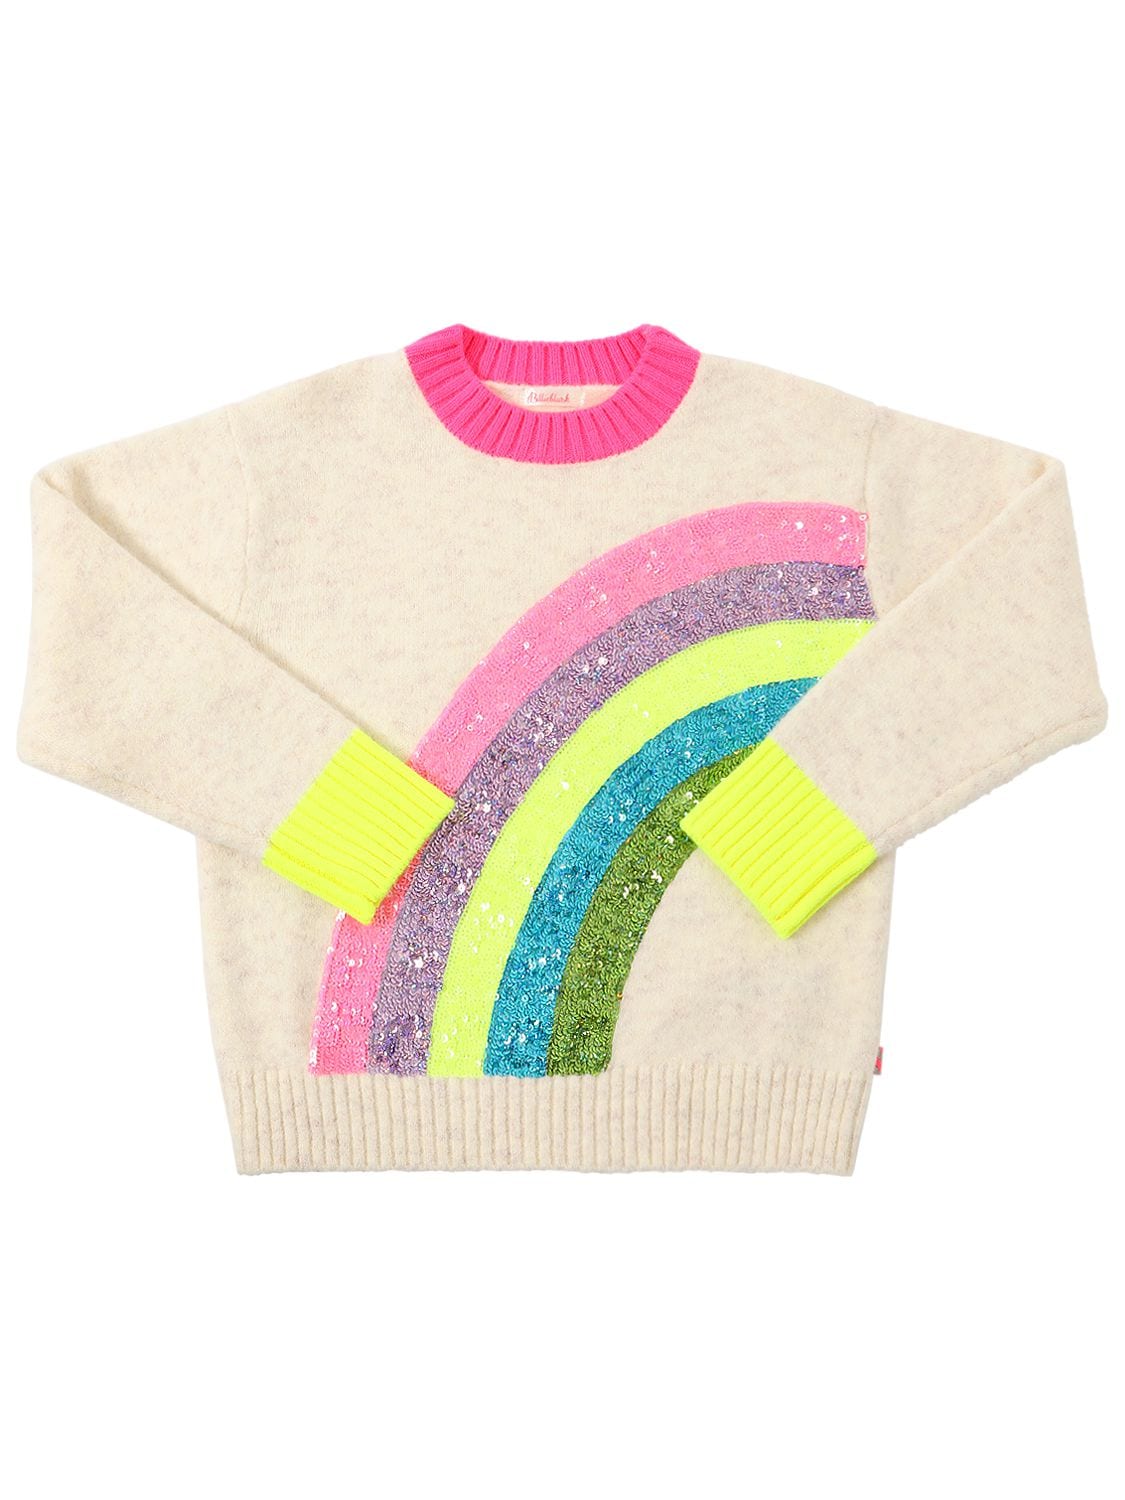 Image of Sequined Wool Blend Knit Sweater